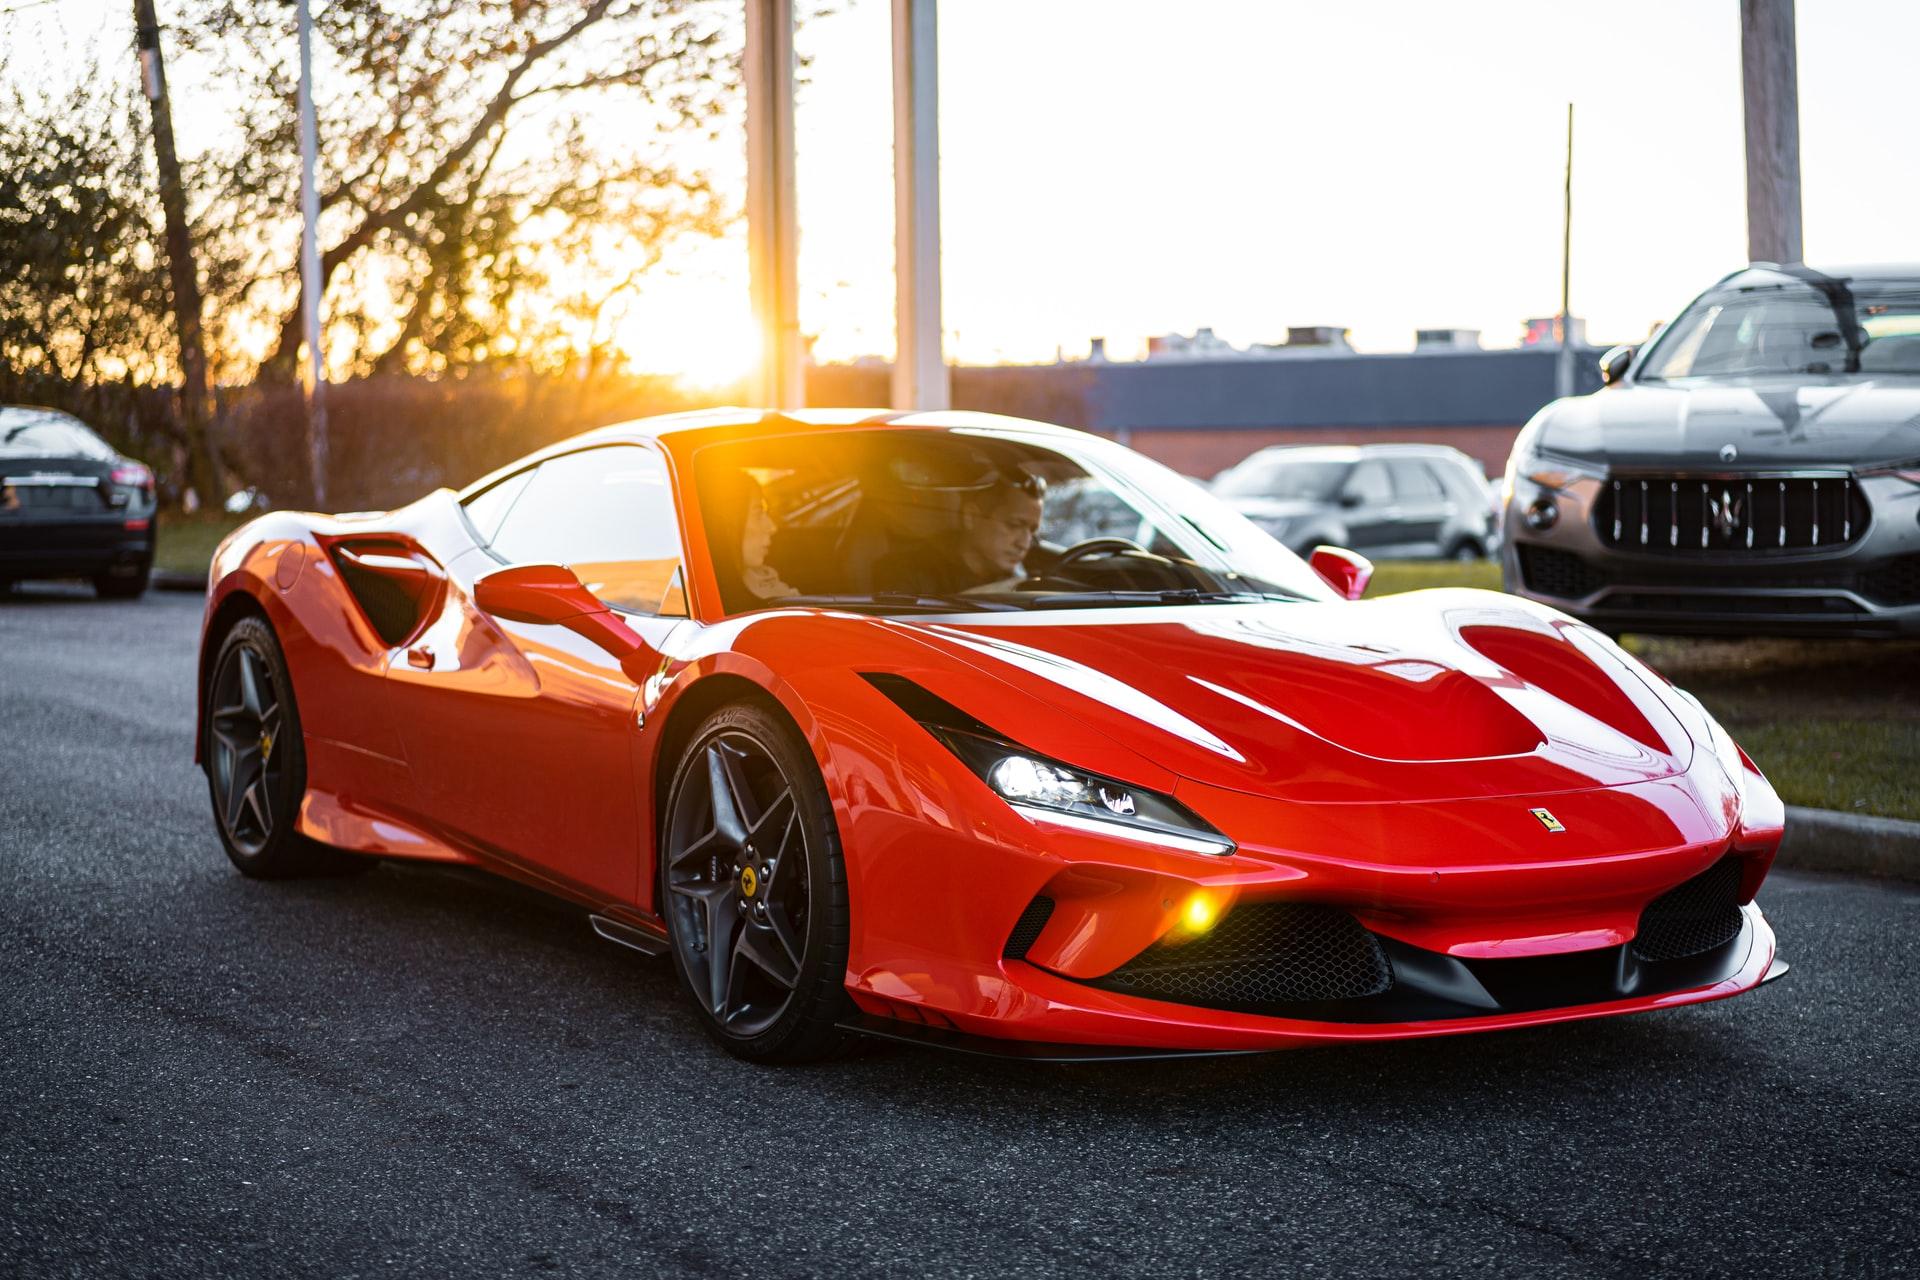 Ferrari has unveiled another decked out supercar